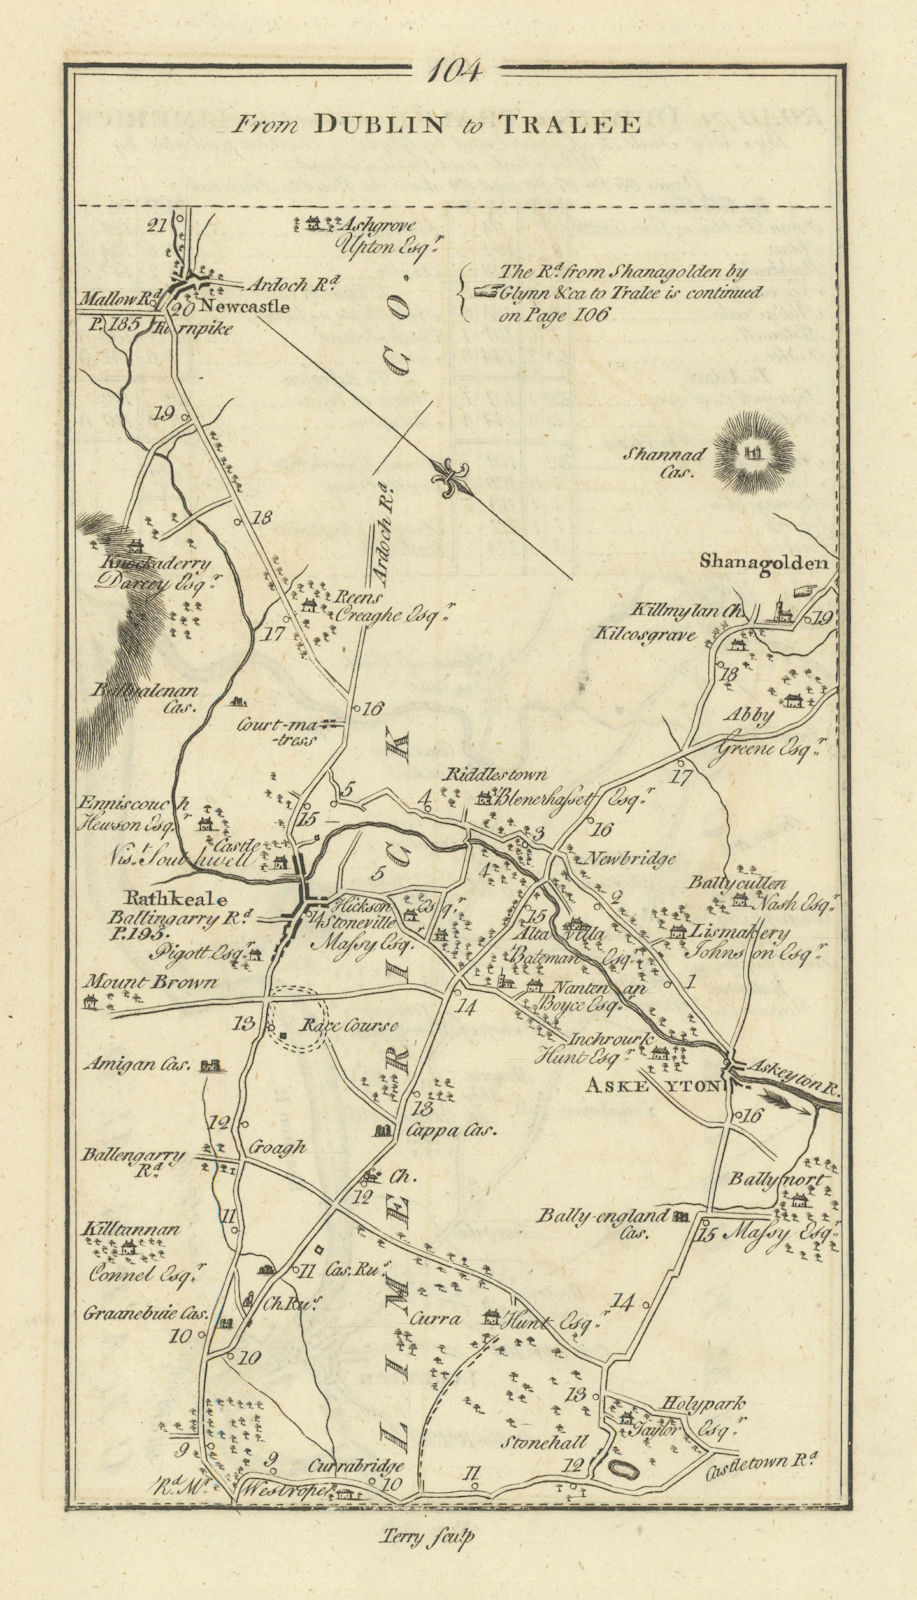 Associate Product #104 Dublin to Tralee. Newcastle Shanagolden Rathkeale. TAYLOR/SKINNER 1778 map